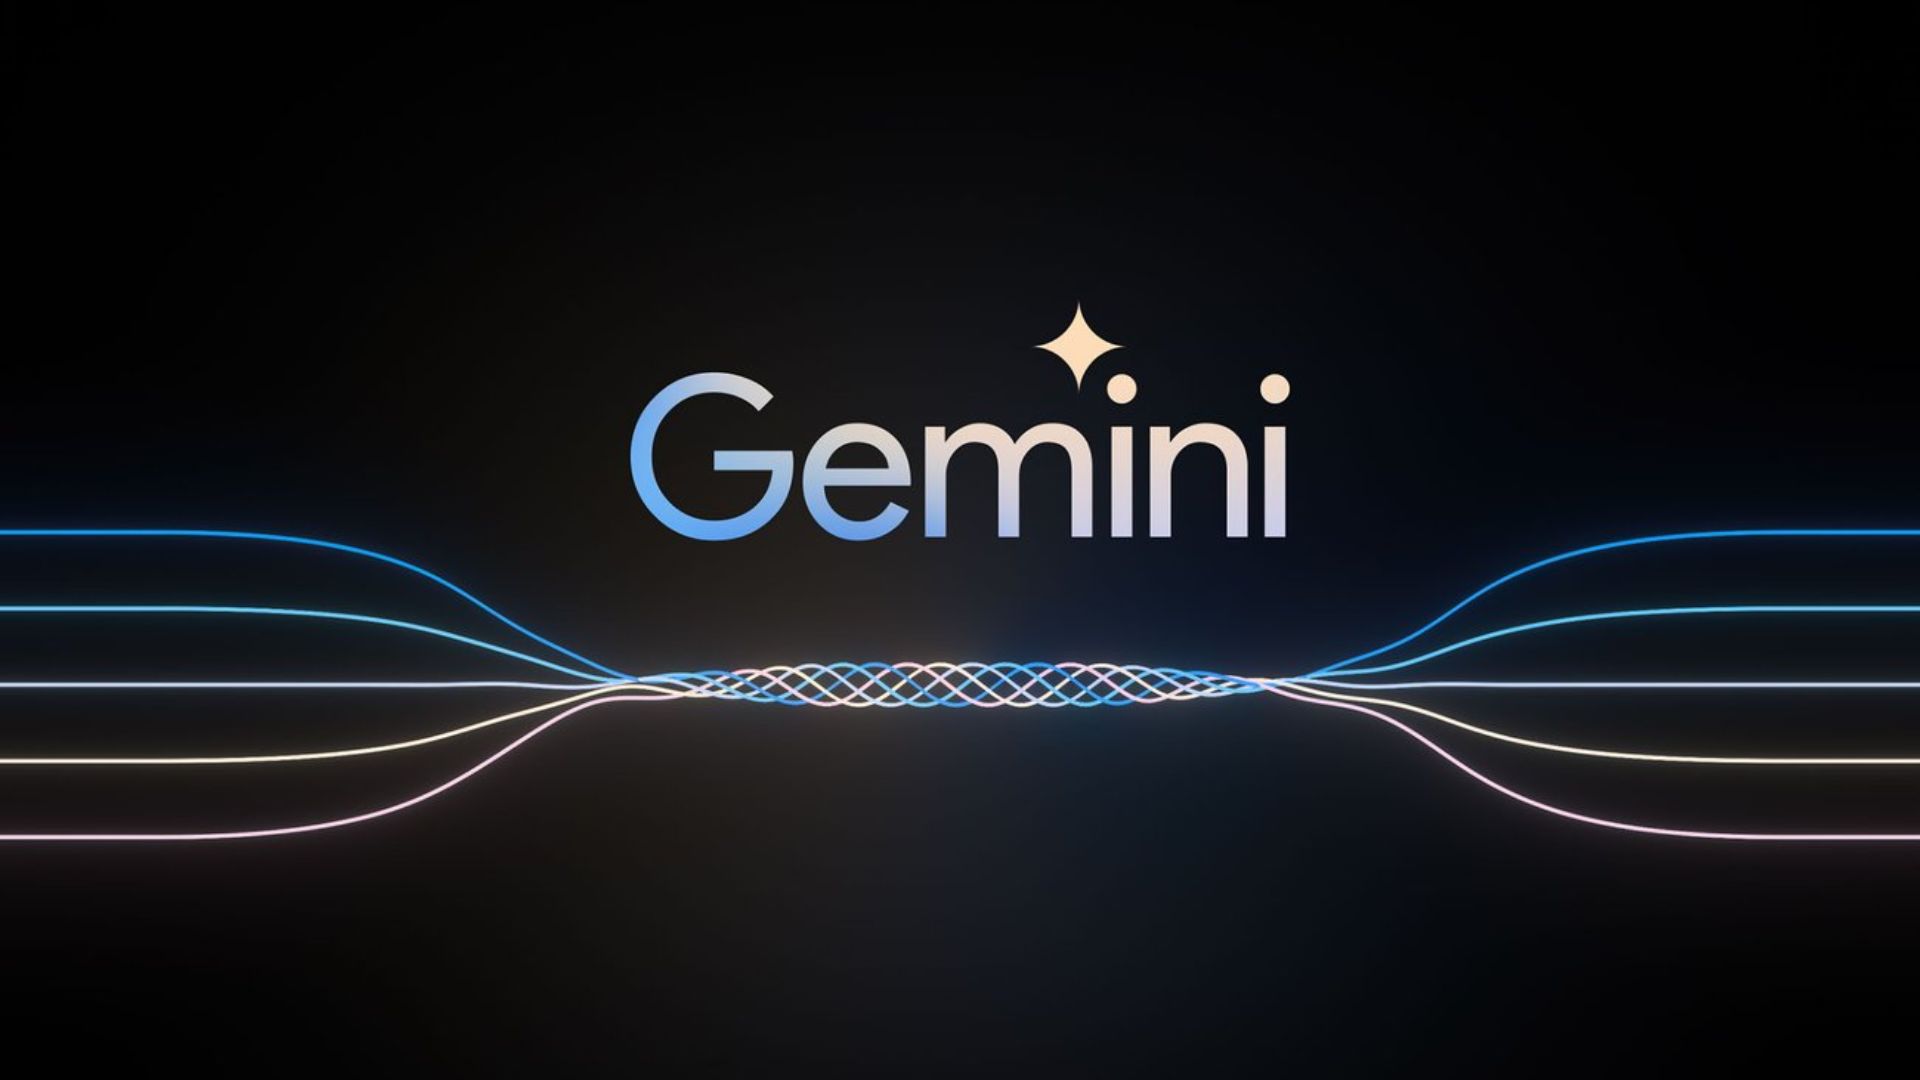 Google’s Gemini Chatbot App Goes Global, Now Available in 150+ Countries